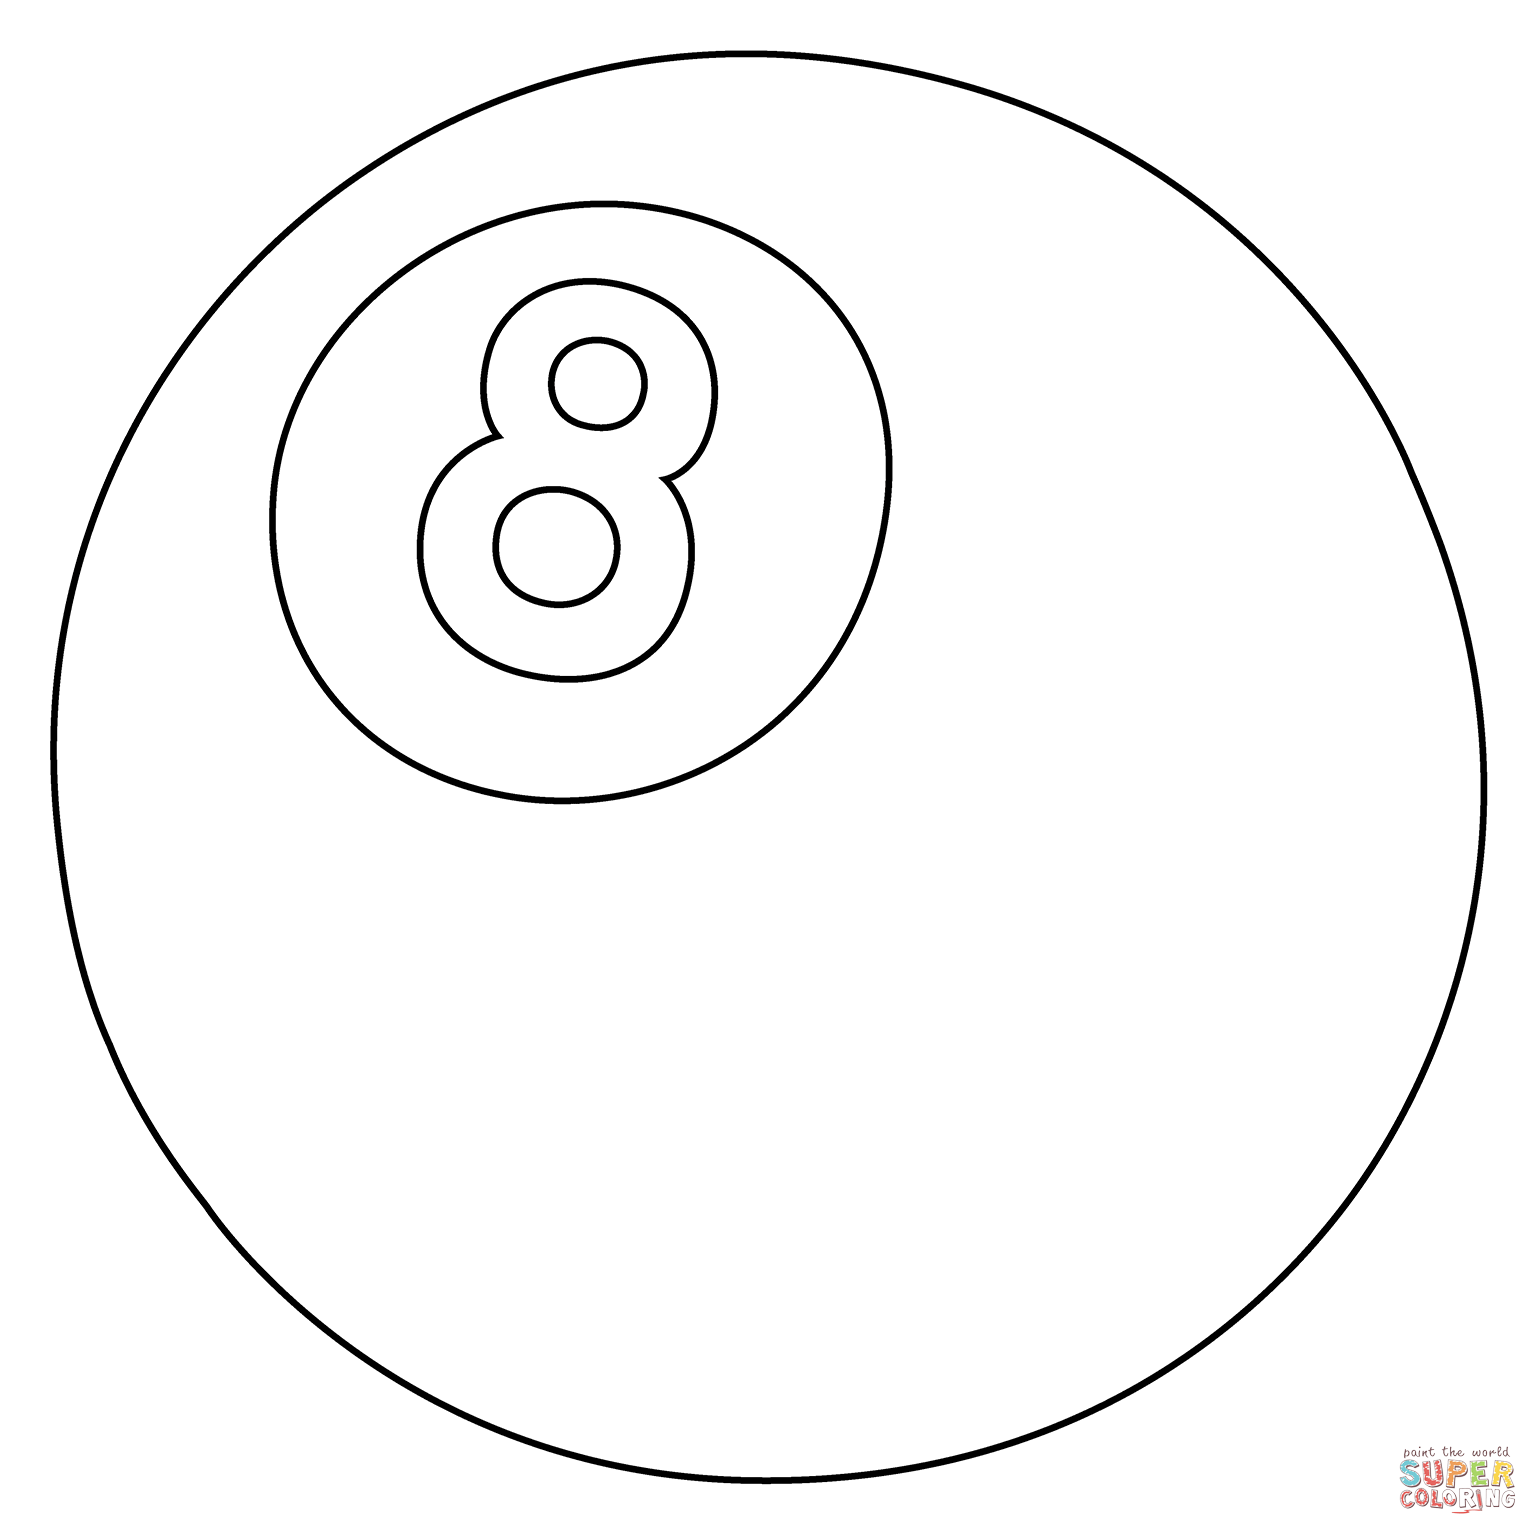 Pool ball emoji coloring page free printable coloring pages